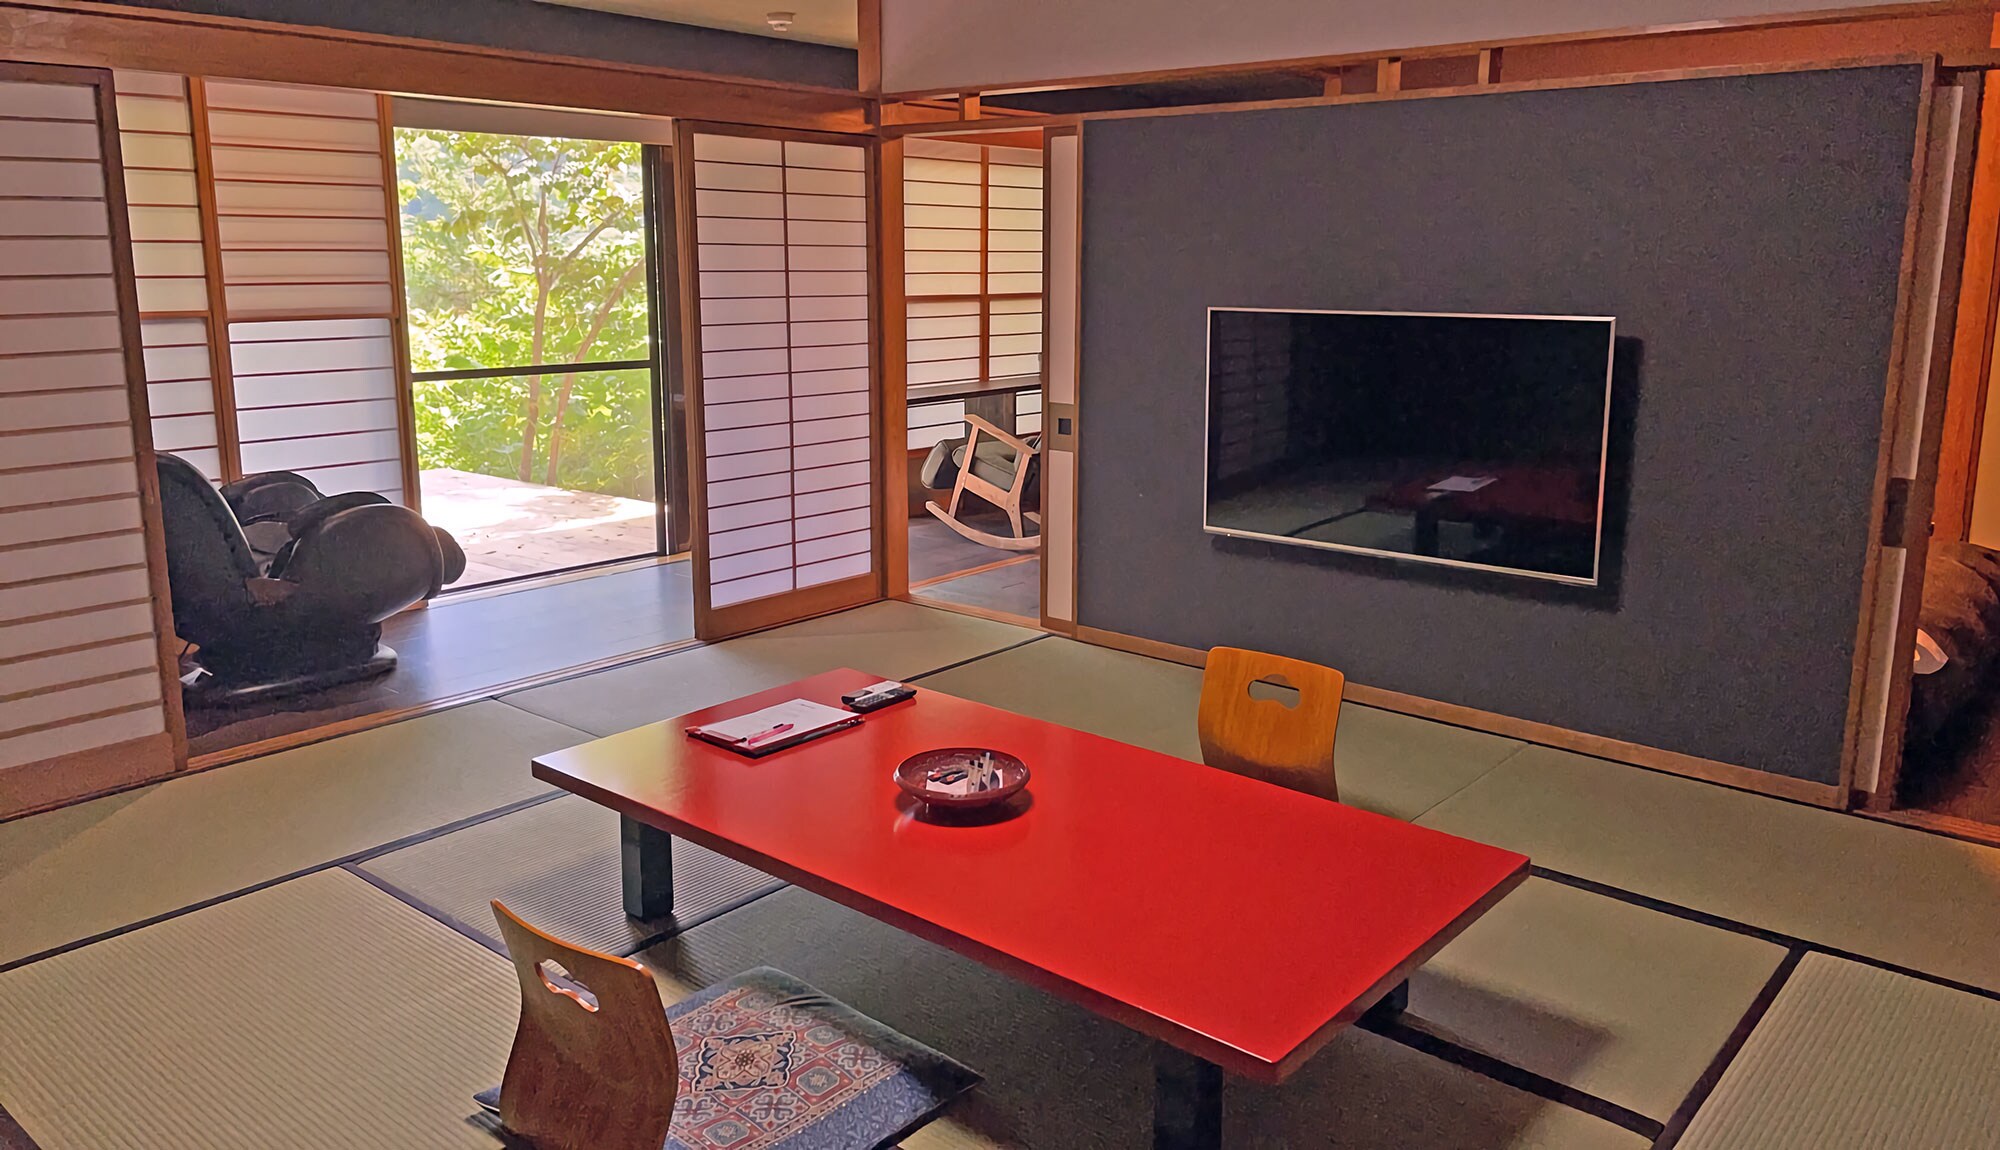 Special room with open-air bath "Matsushima"